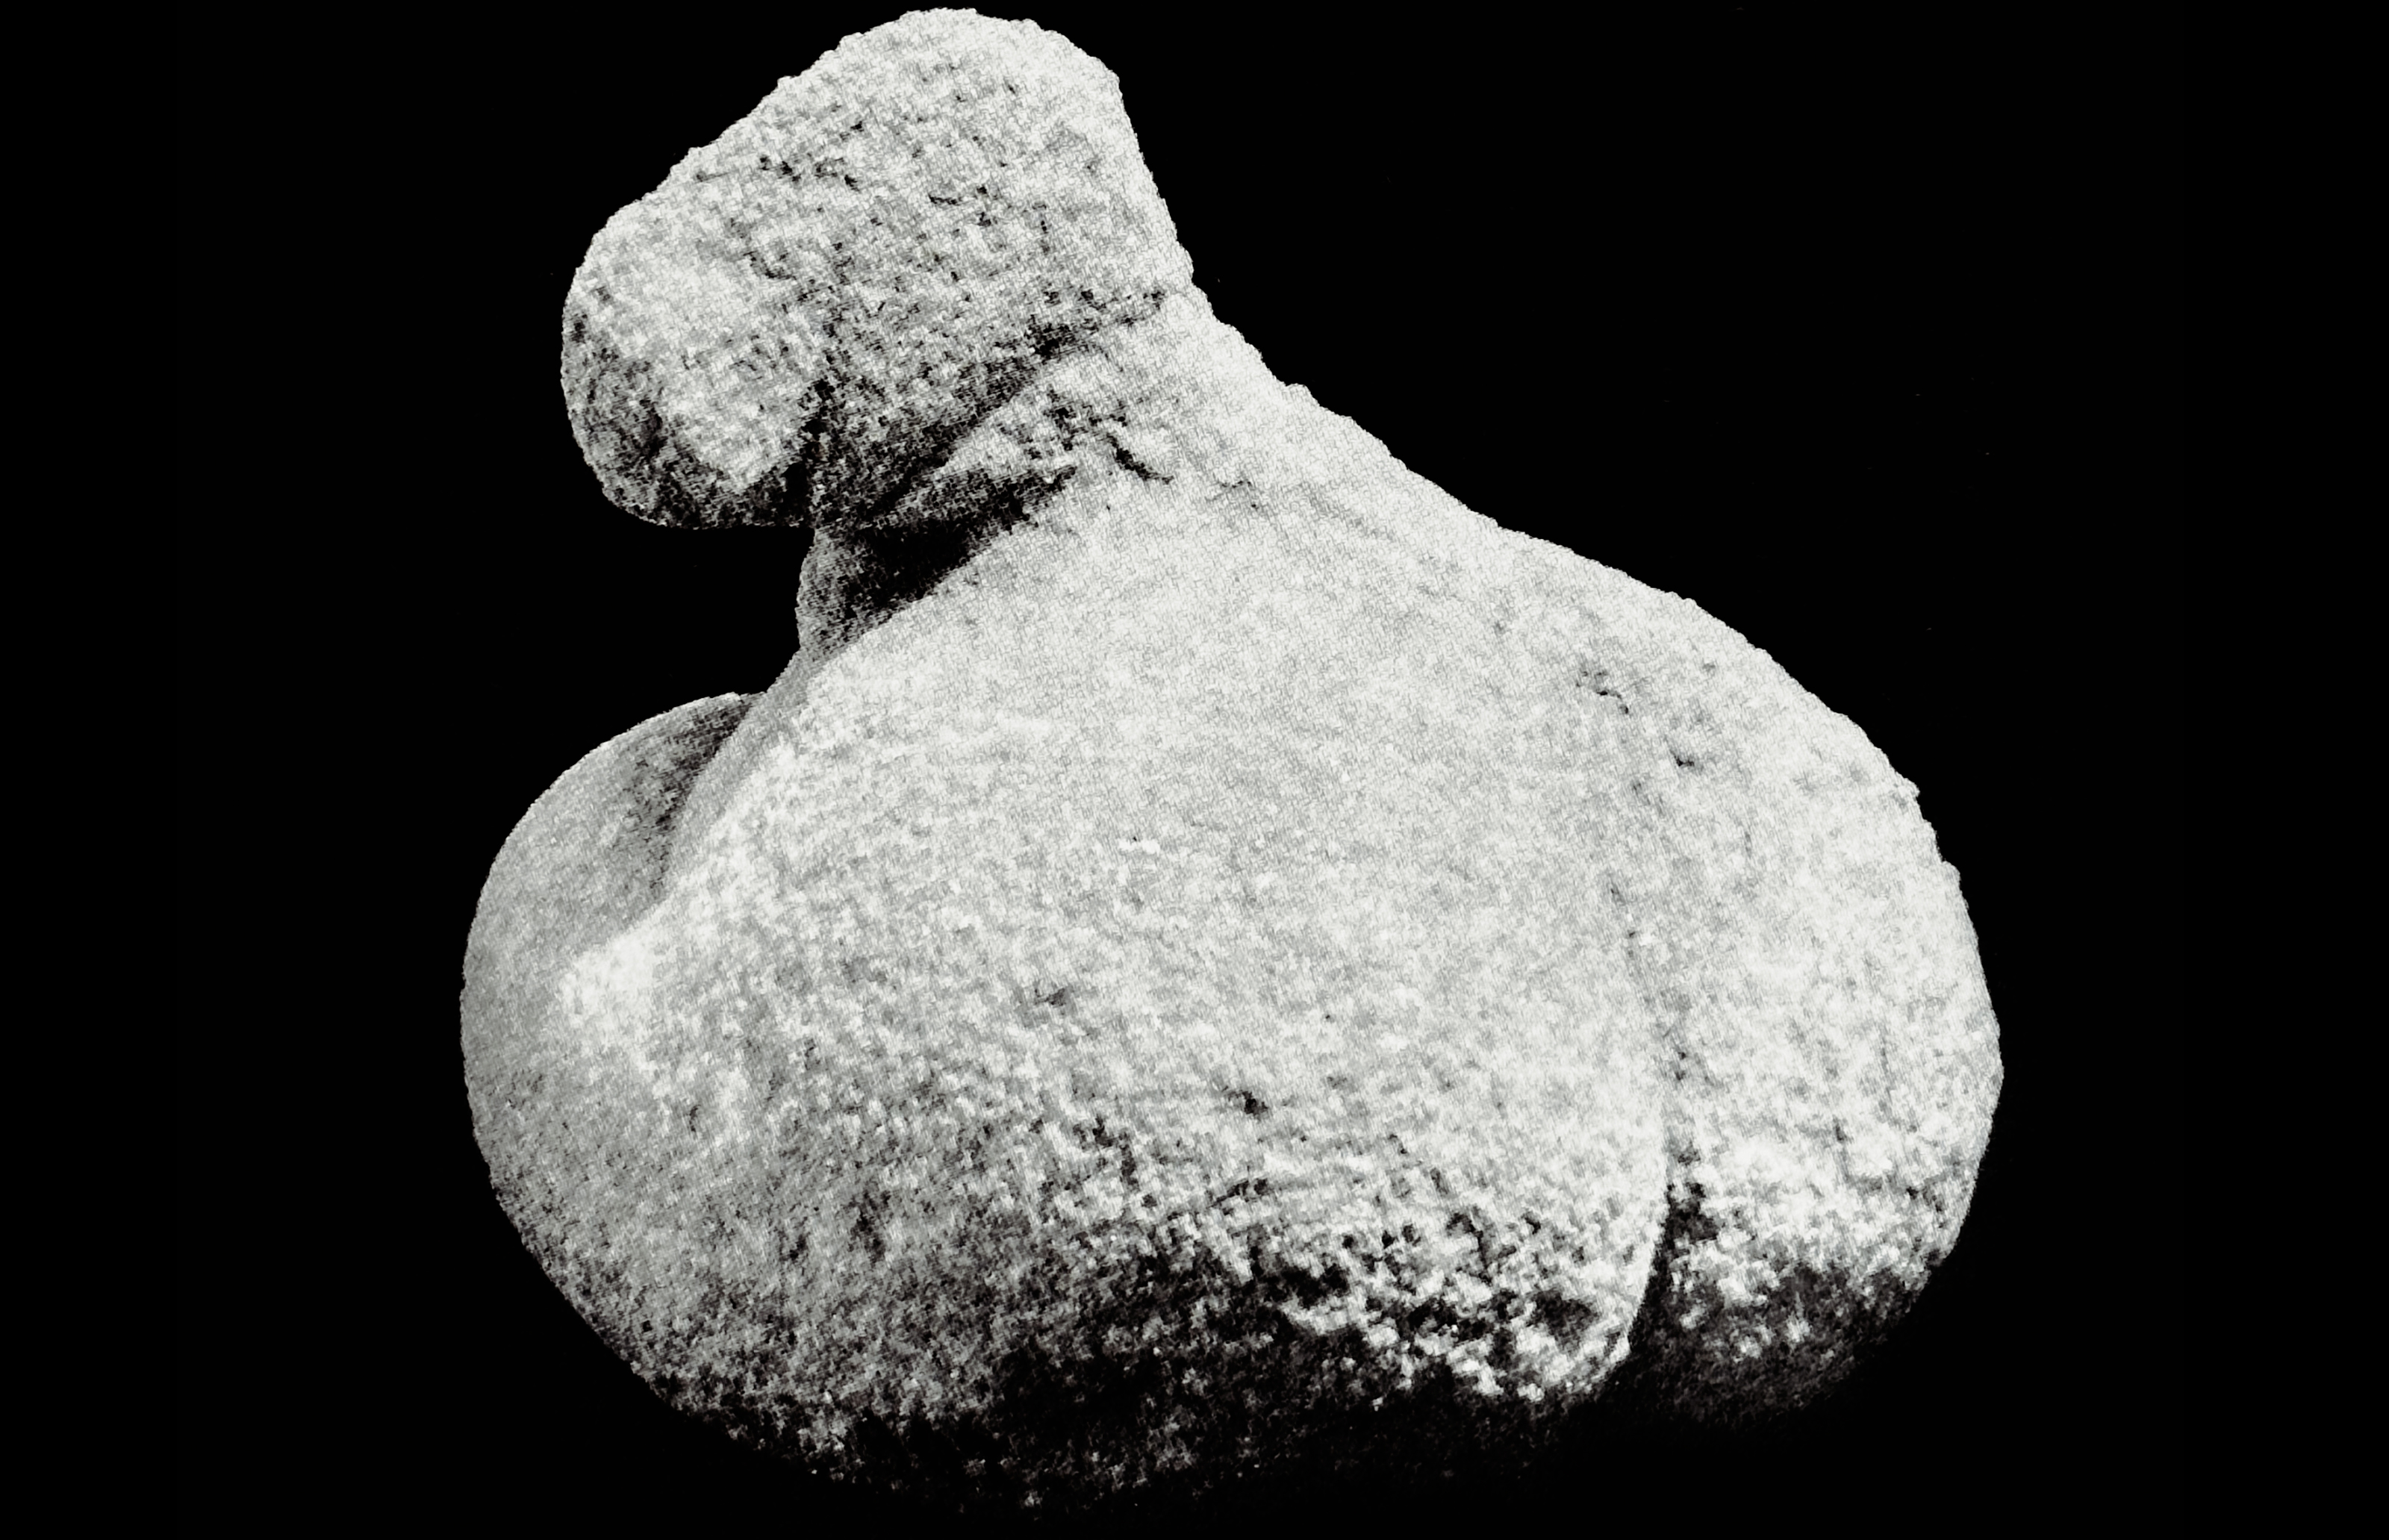 The Cycladic Sculptures - The Fat Lady of Saliagos